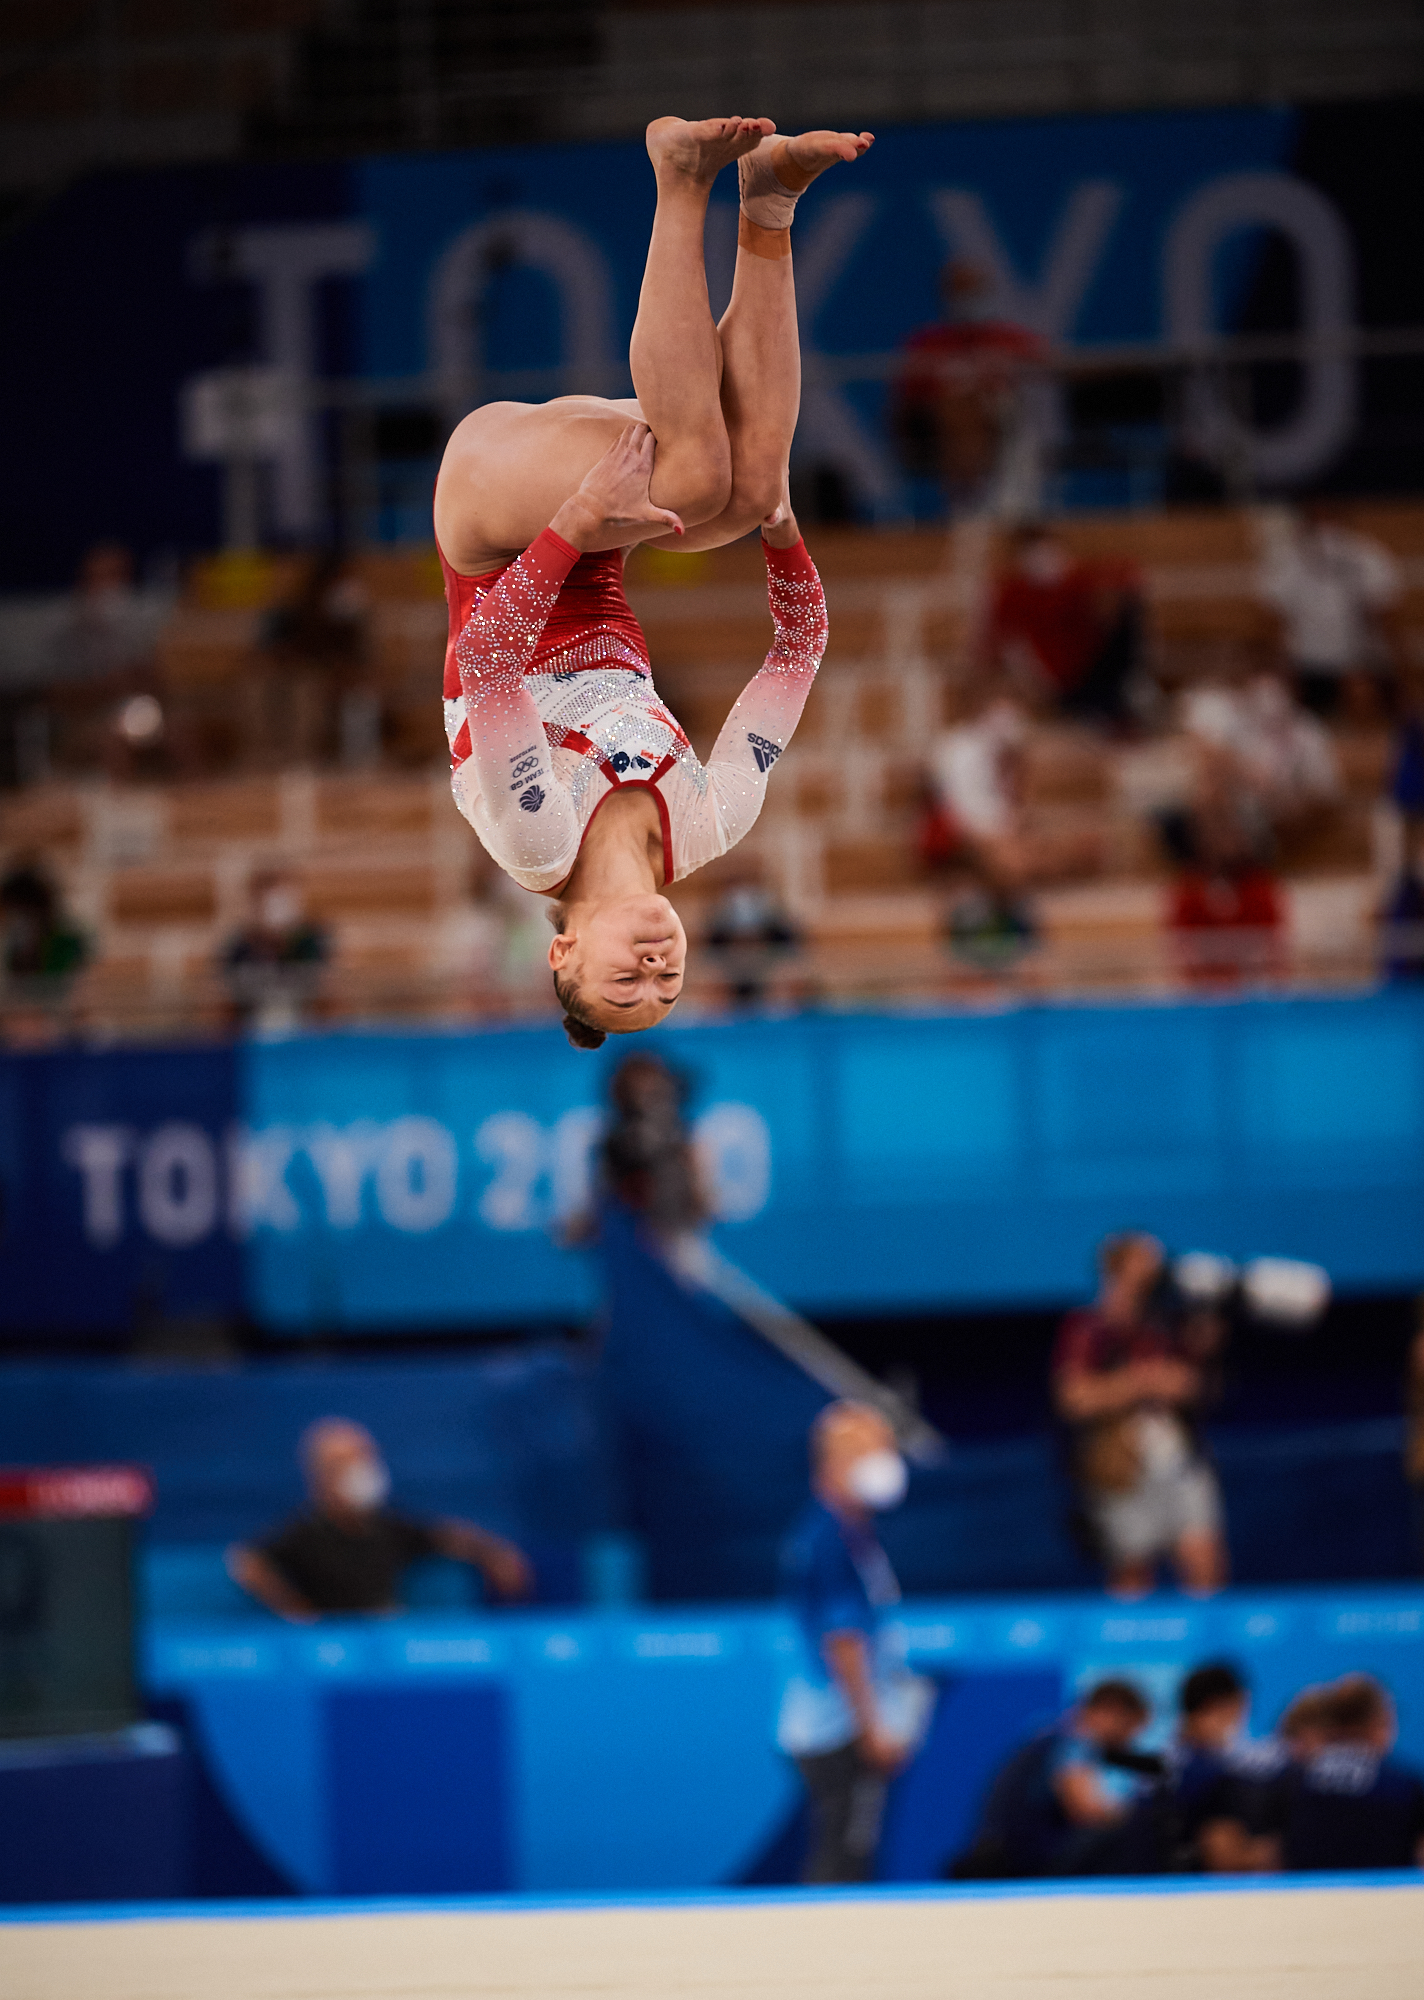 Photo: Great Britain's Jessica Gadirova, competes on the floor exercise in Rotation 2 during the race for 3rd place at women's gymnastics finals during the 2020 Tokyo Olympics at Ariake Gymnastics Center in Tokyo, Japan.